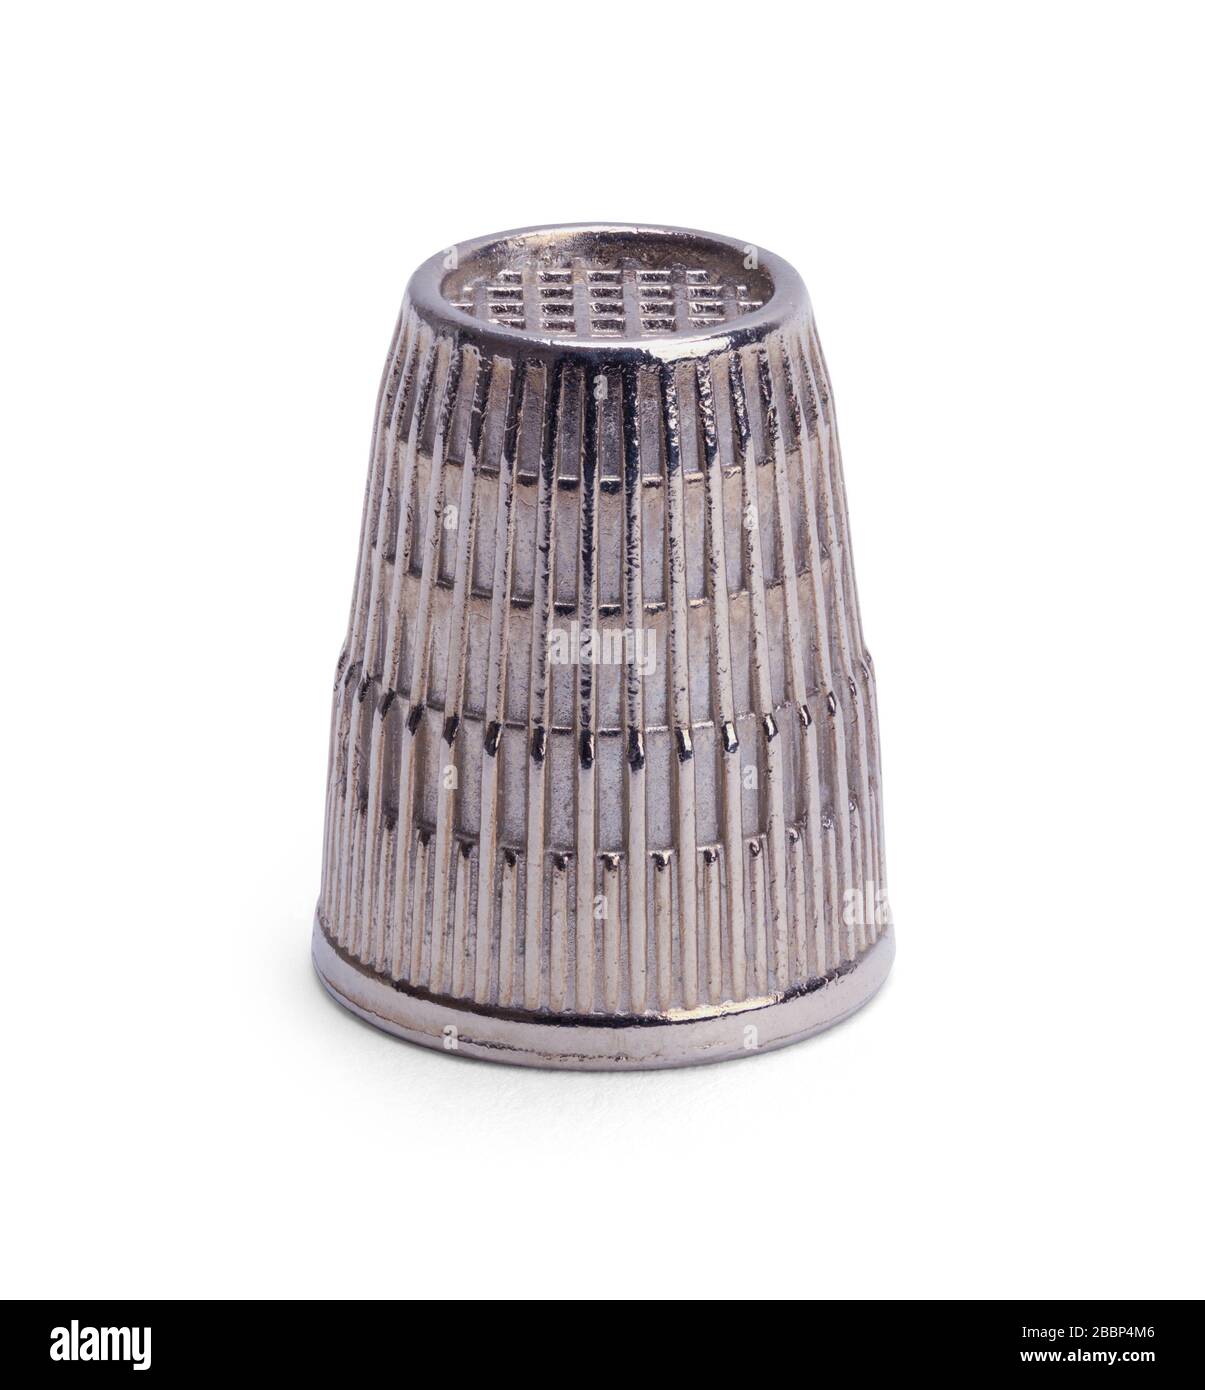 Old Metal Thimble Isolated on White Background. Stock Photo